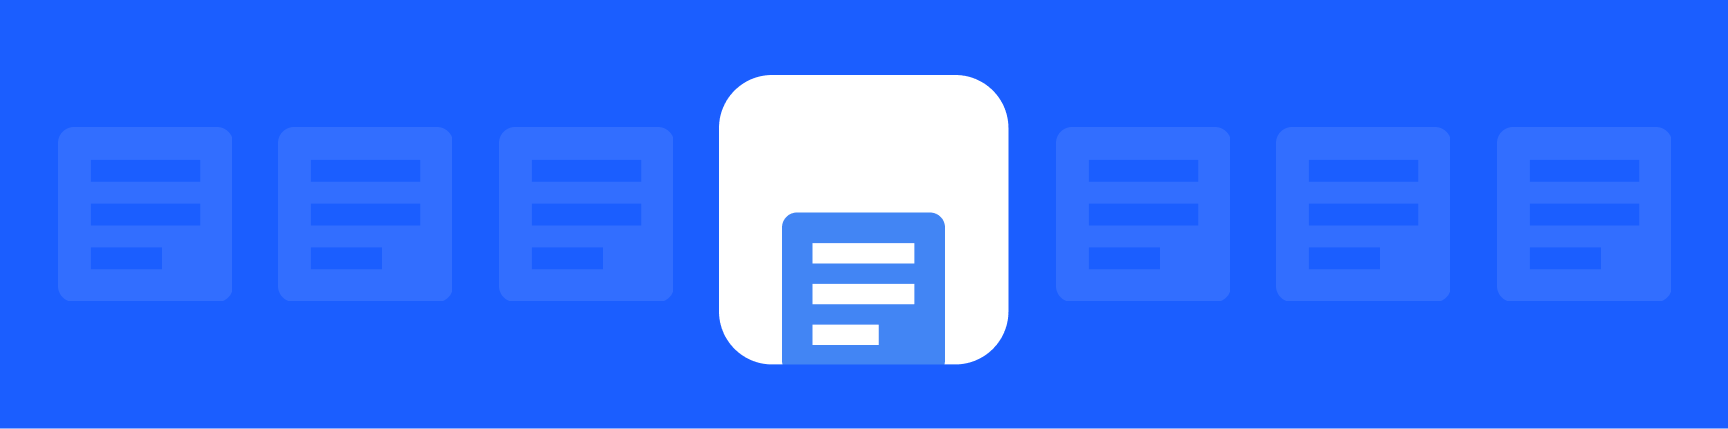 A white block with the Google Docs logo in the foreground, with a blue background